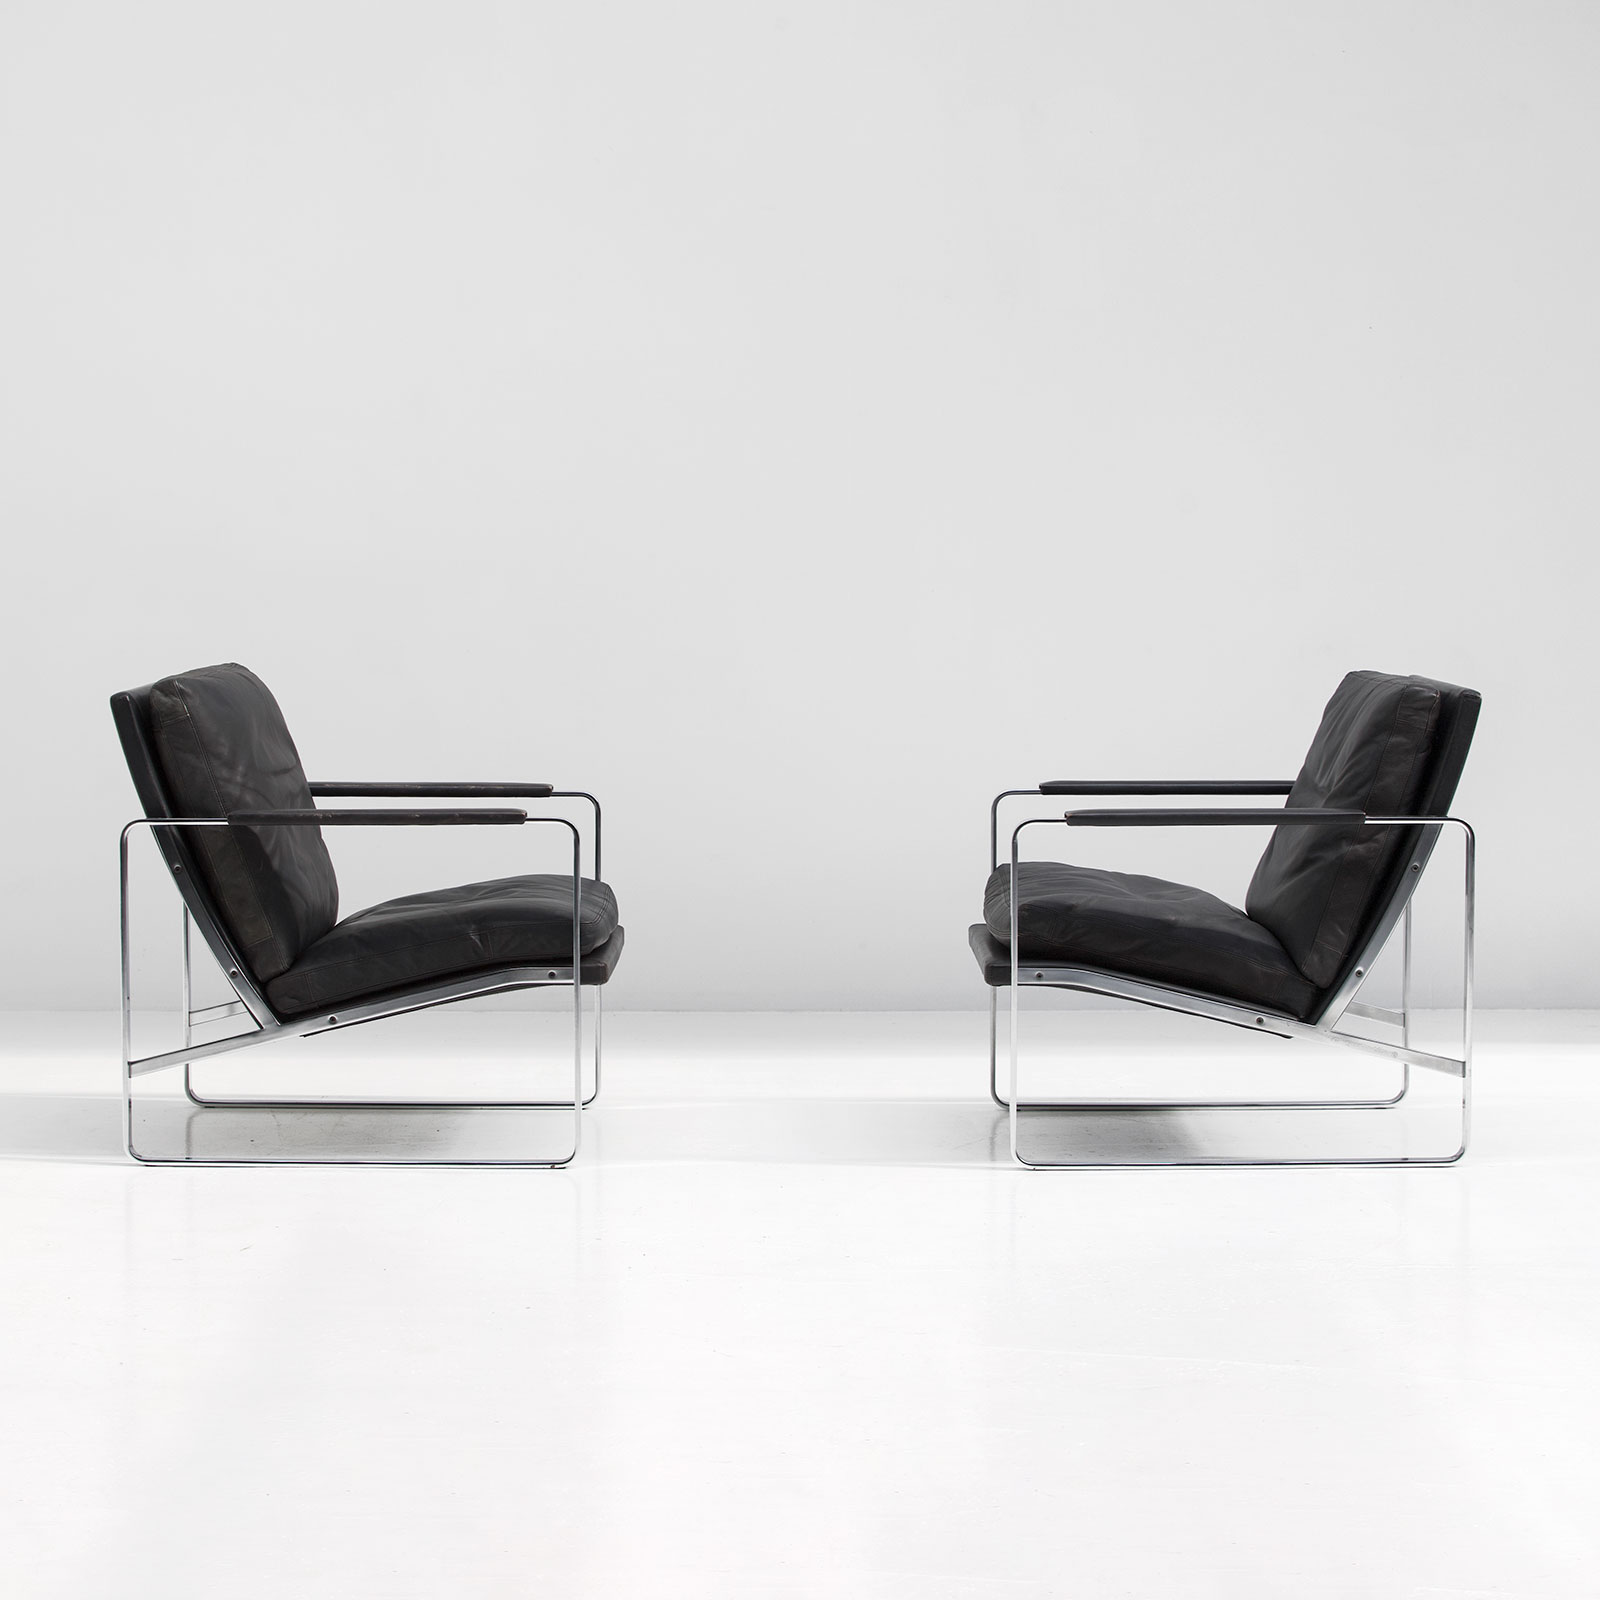 Pair of armchairs designed by Preben Fabricius for Walter Knoll